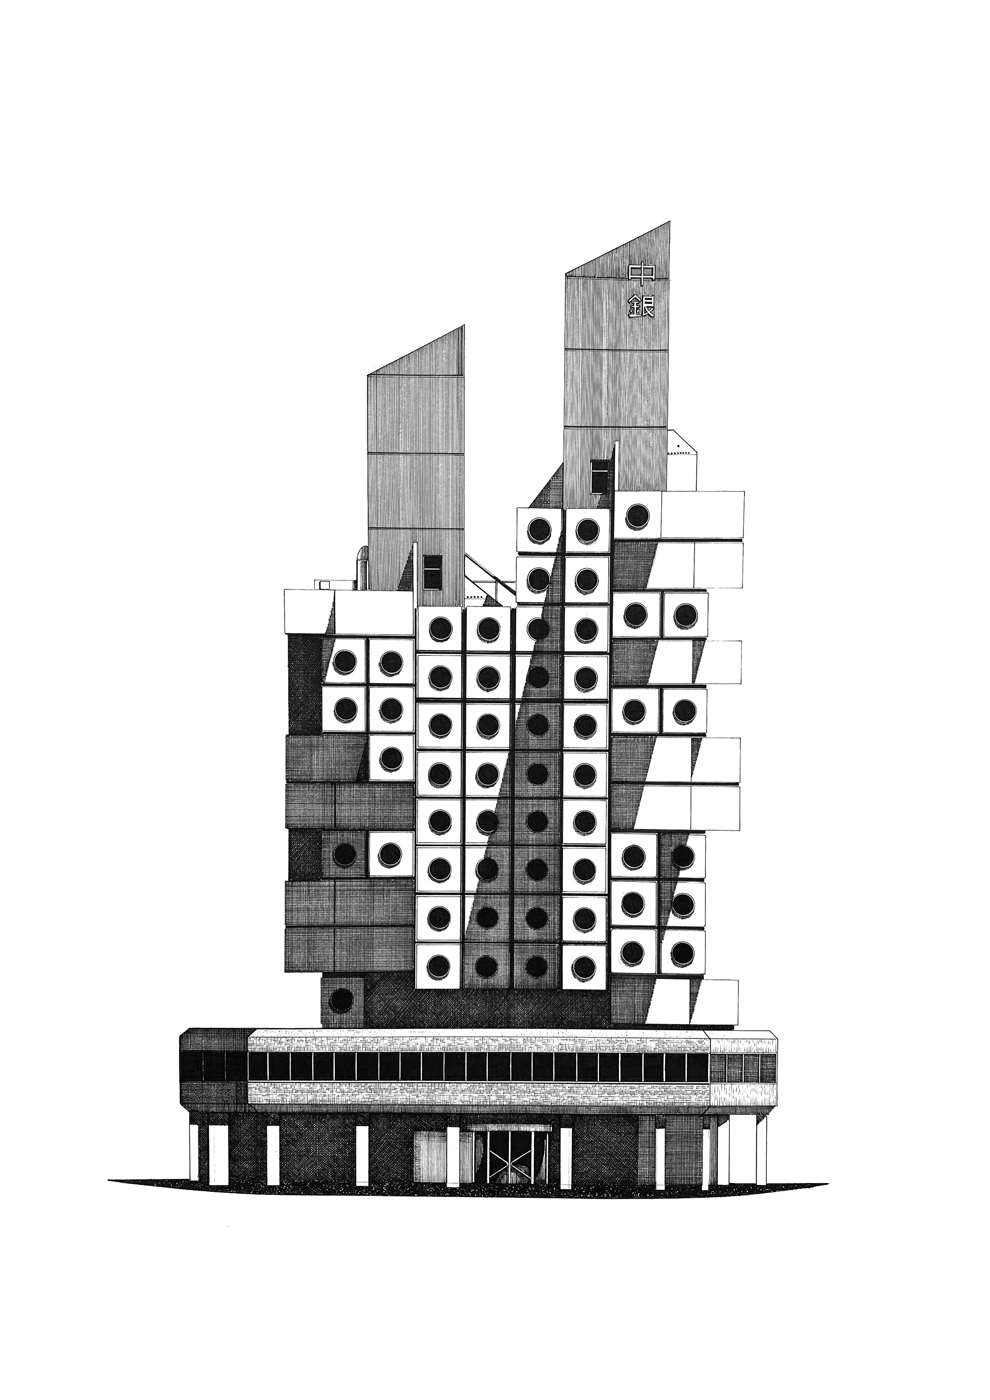 Nick Coupland, Hyper-realistic detailed pen and ink architecture illustration of the Nagakin Tower. Striking, bold geometric image.  